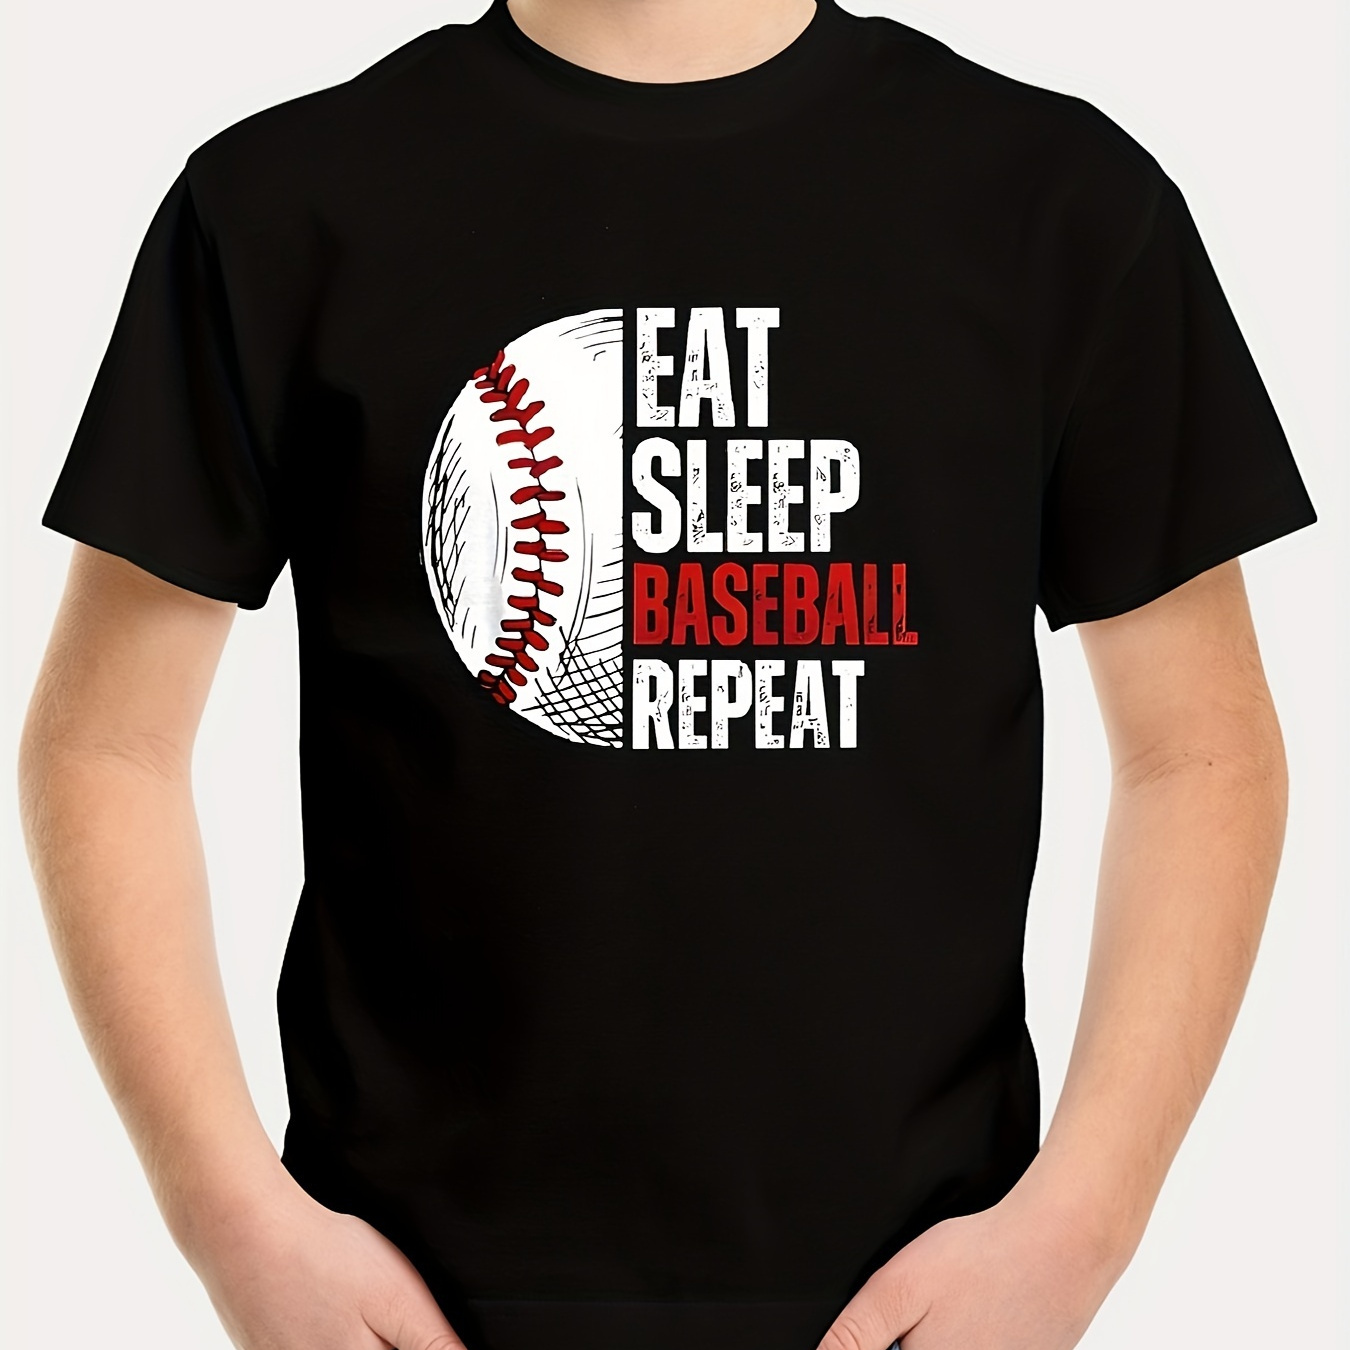 

Eat Sleep Baseball Repeat Letter - Forever Cool And Innovative Novelty 3d Print T-shirt, Perfect For Fun-loving Boys